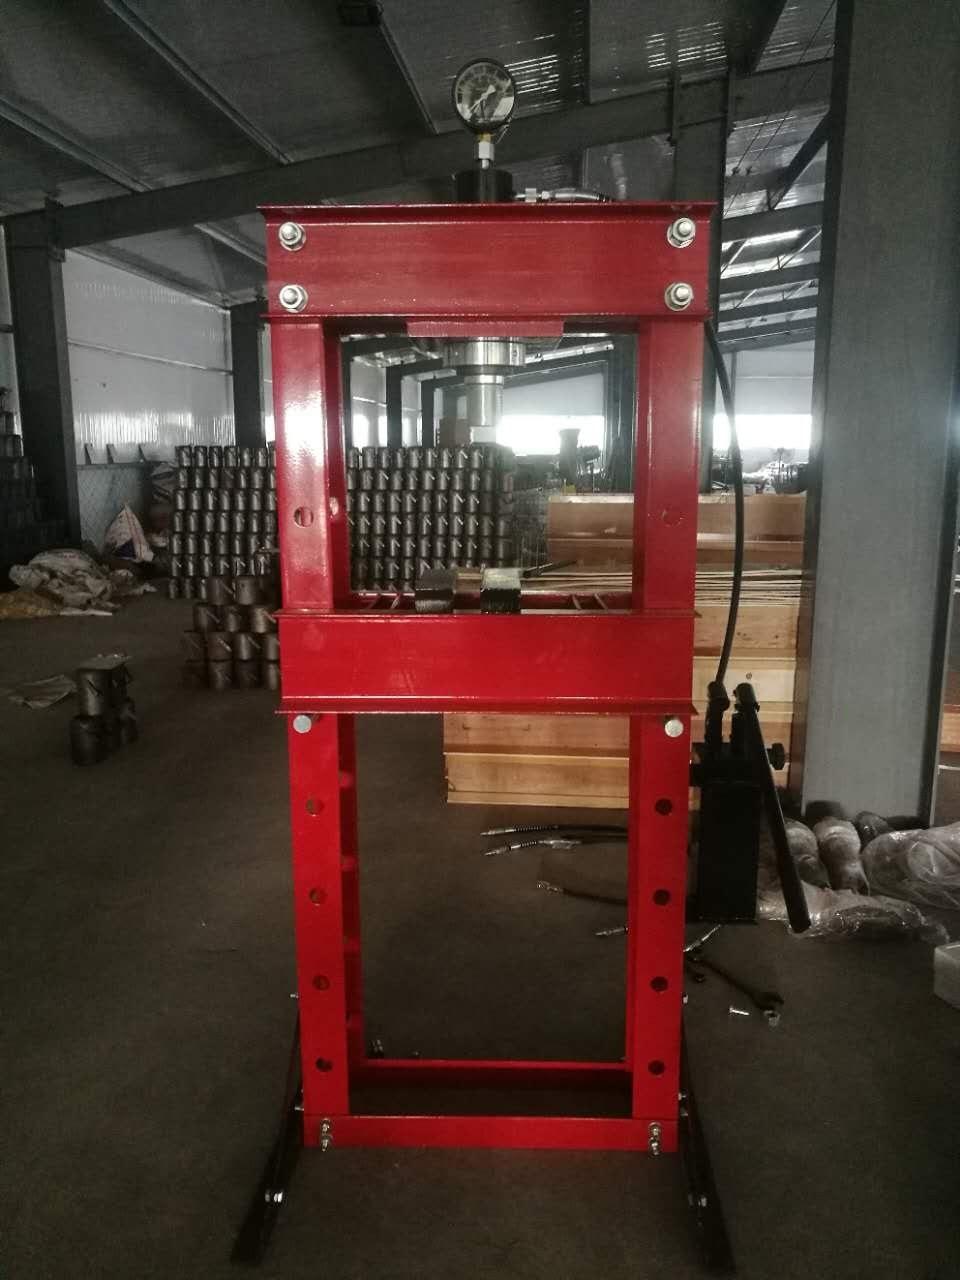 Garage Repaired Tools 6t Hydraulic Shop Press